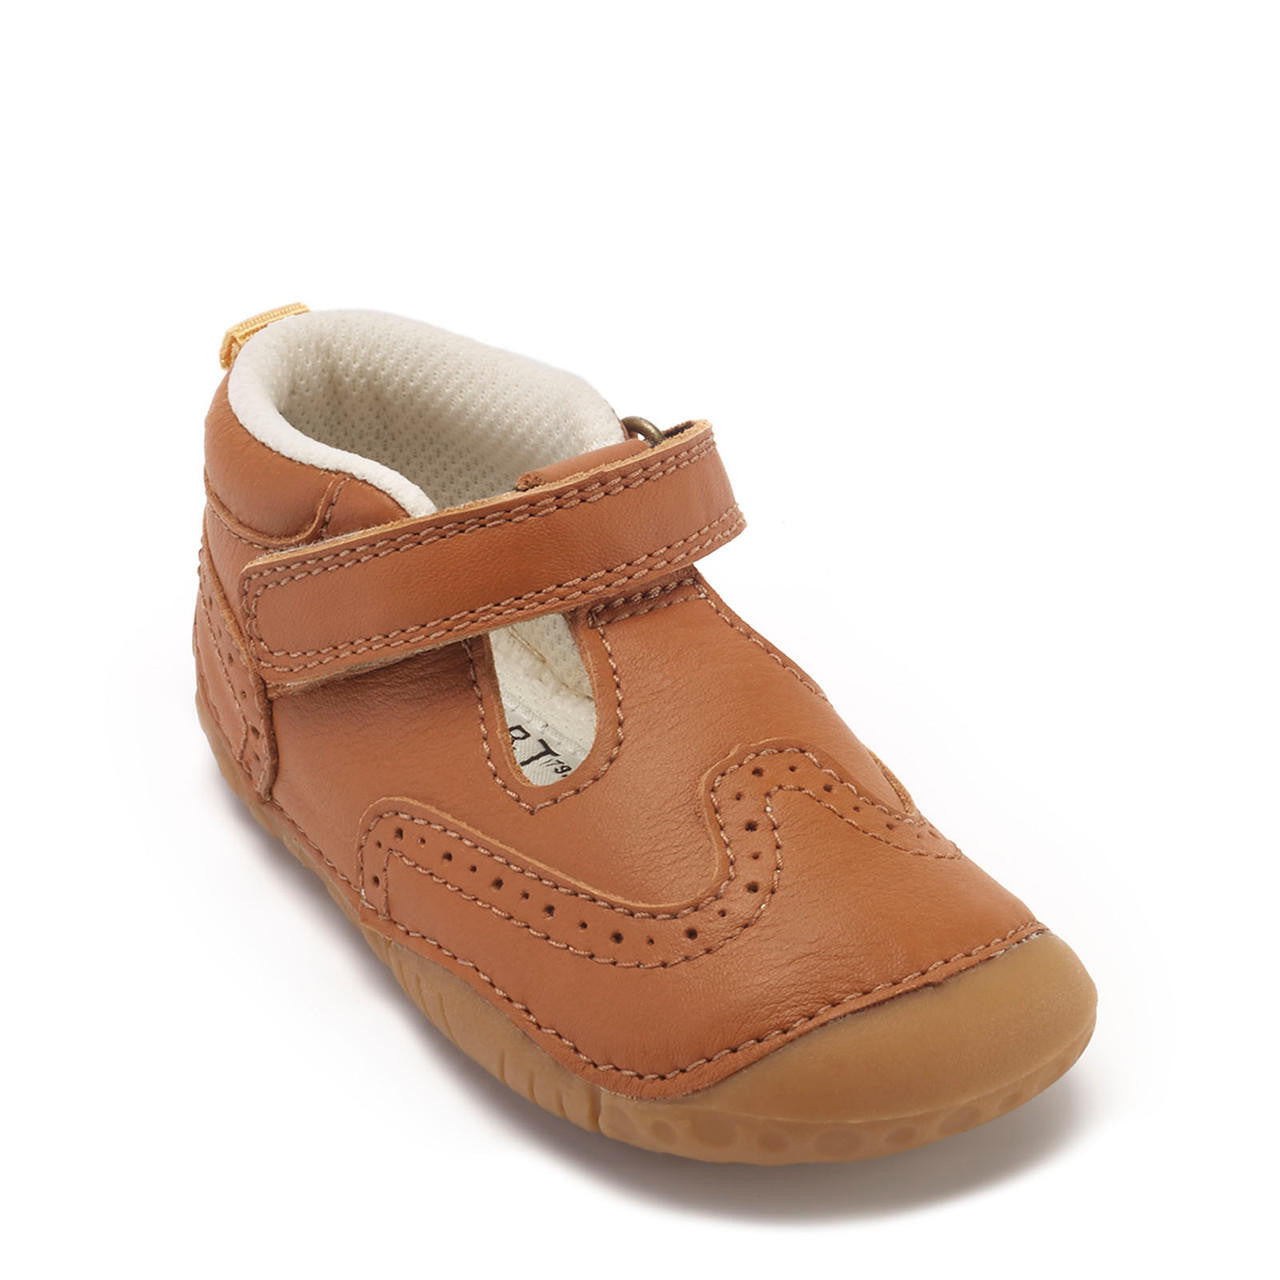 A boys T-Bar pre-walker by Start-Rite + JoJo Maman Bebe, style Share,in tan leather with brogue detail and toe bumper. Velcro fastening. Angled right side view.